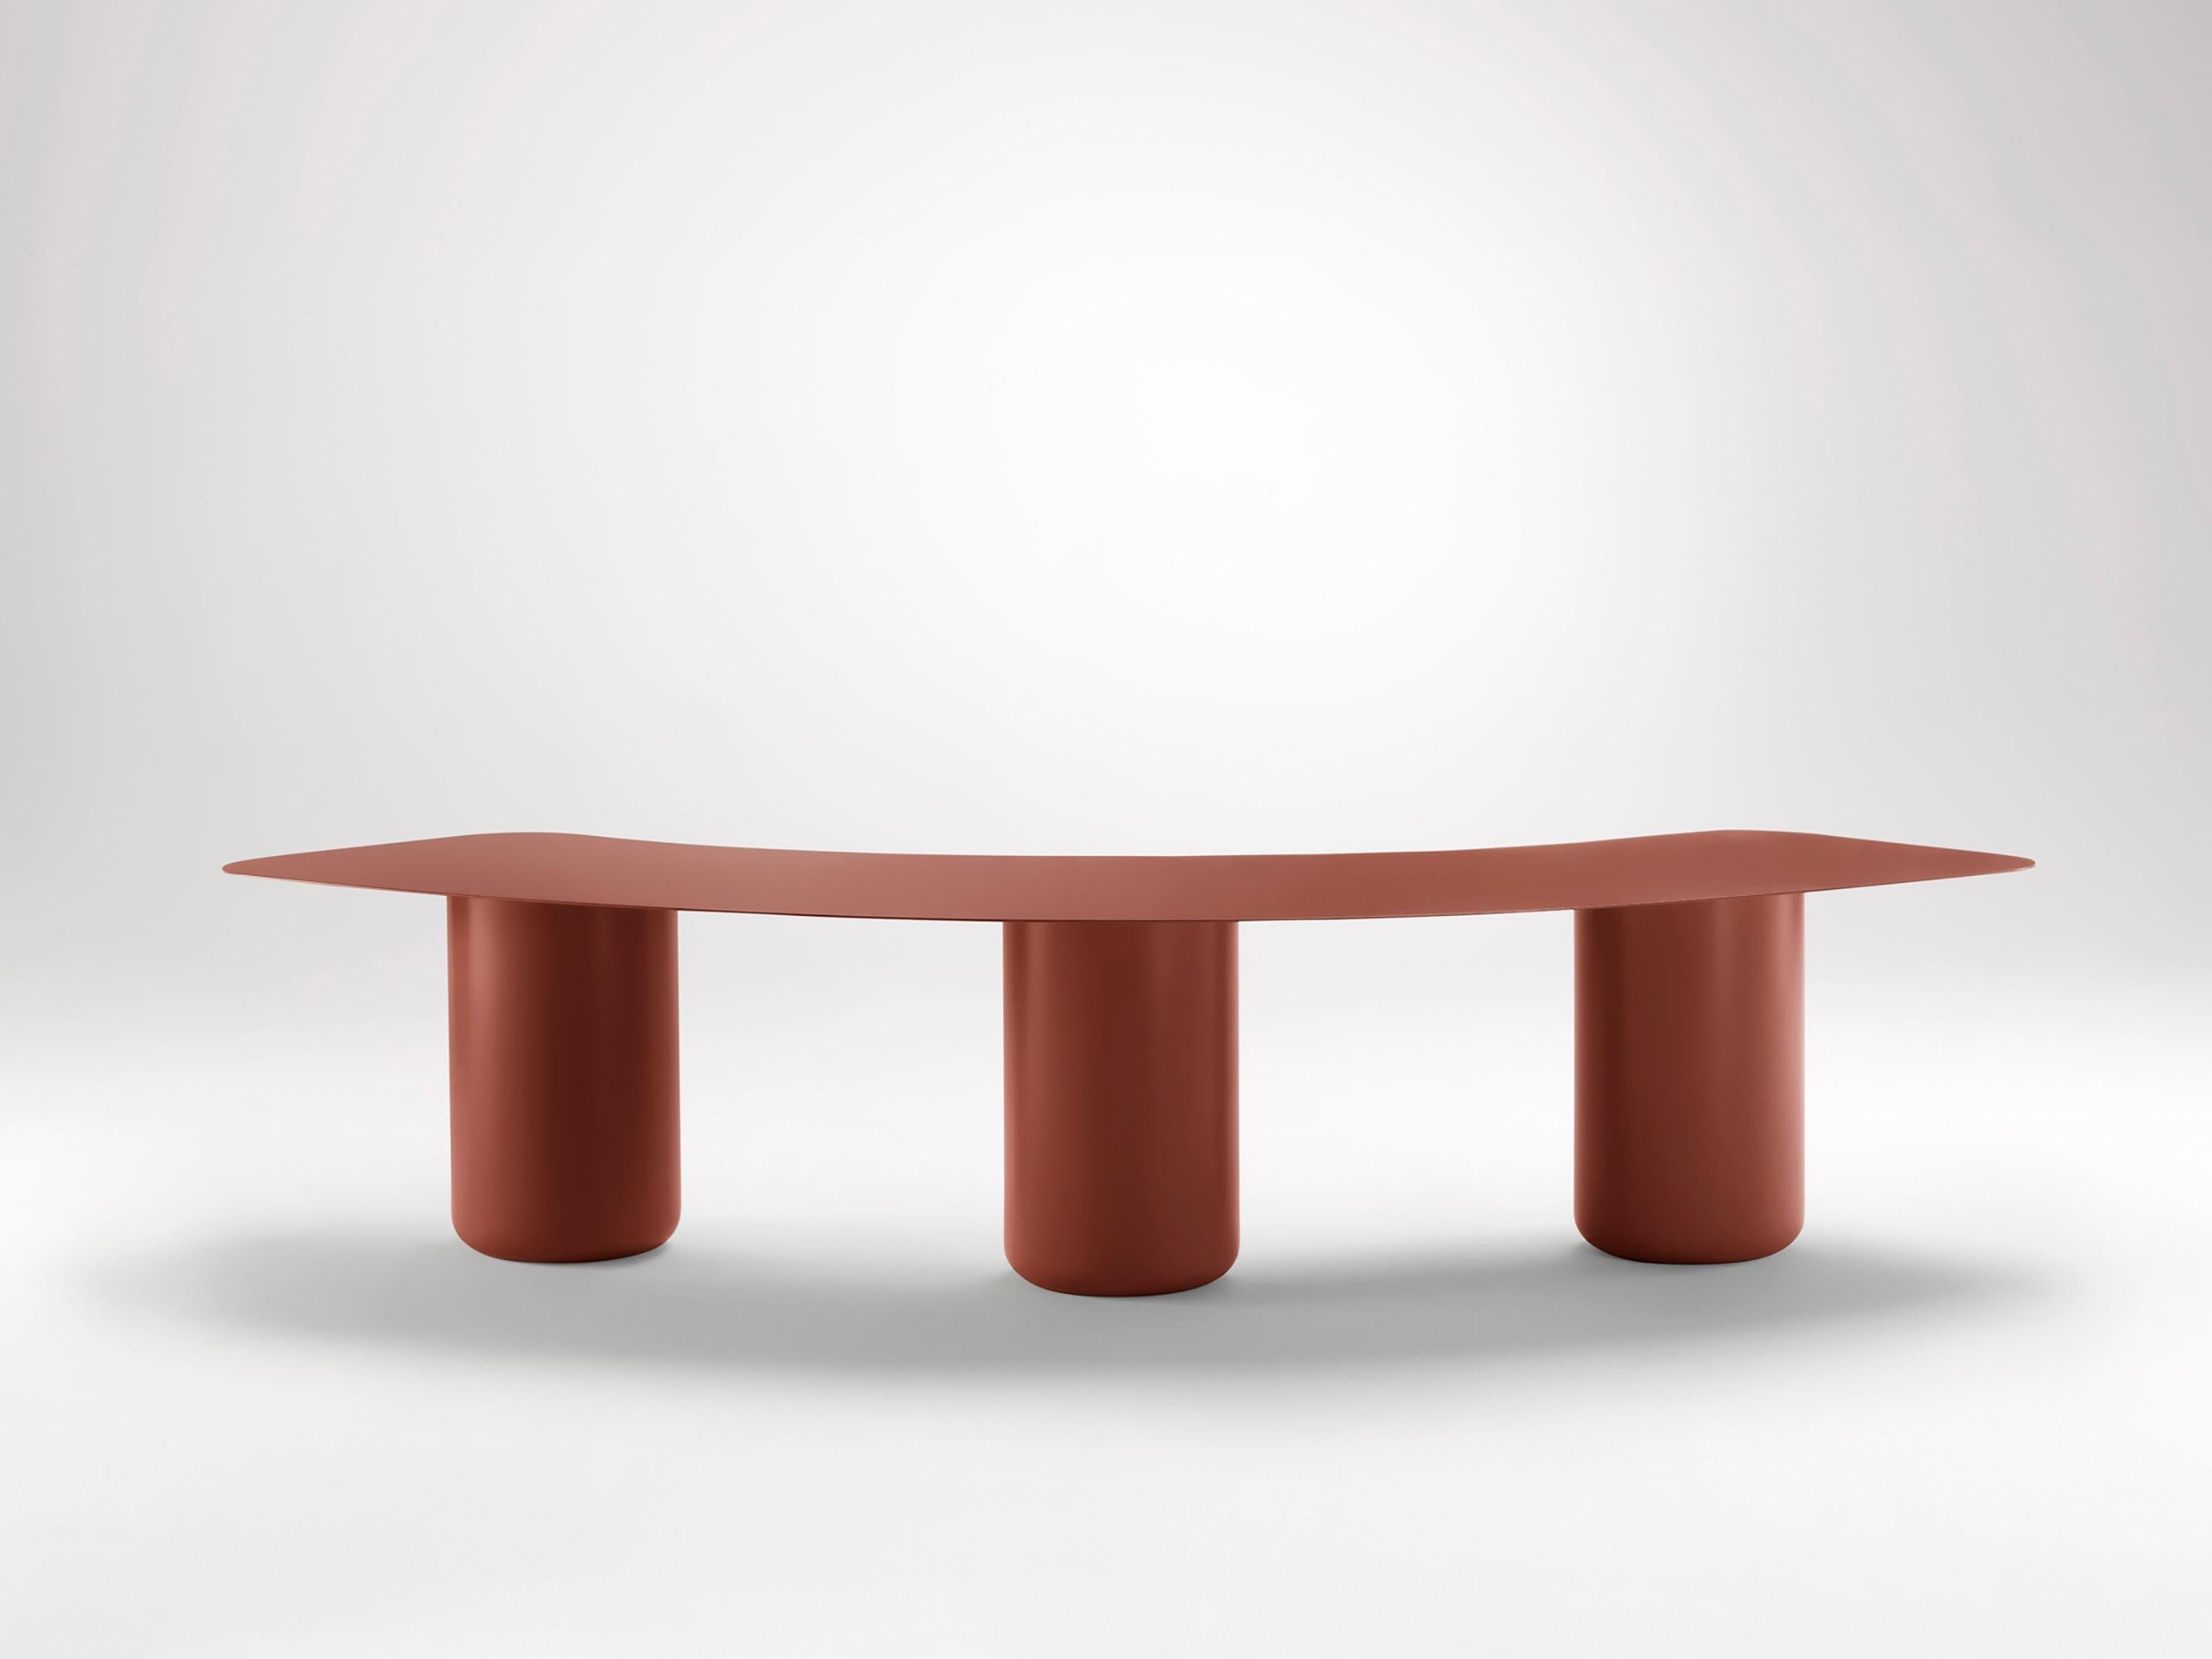 Large Headland Red Curved Bench by Coco Flip
Dimensions: D 75 x W 200 x H 42 cm
Materials: Mild steel, powder-coated with zinc undercoat. 
Weight: 44 kg

Coco Flip is a Melbourne based furniture and lighting design studio, run by us, Kate Stokes and